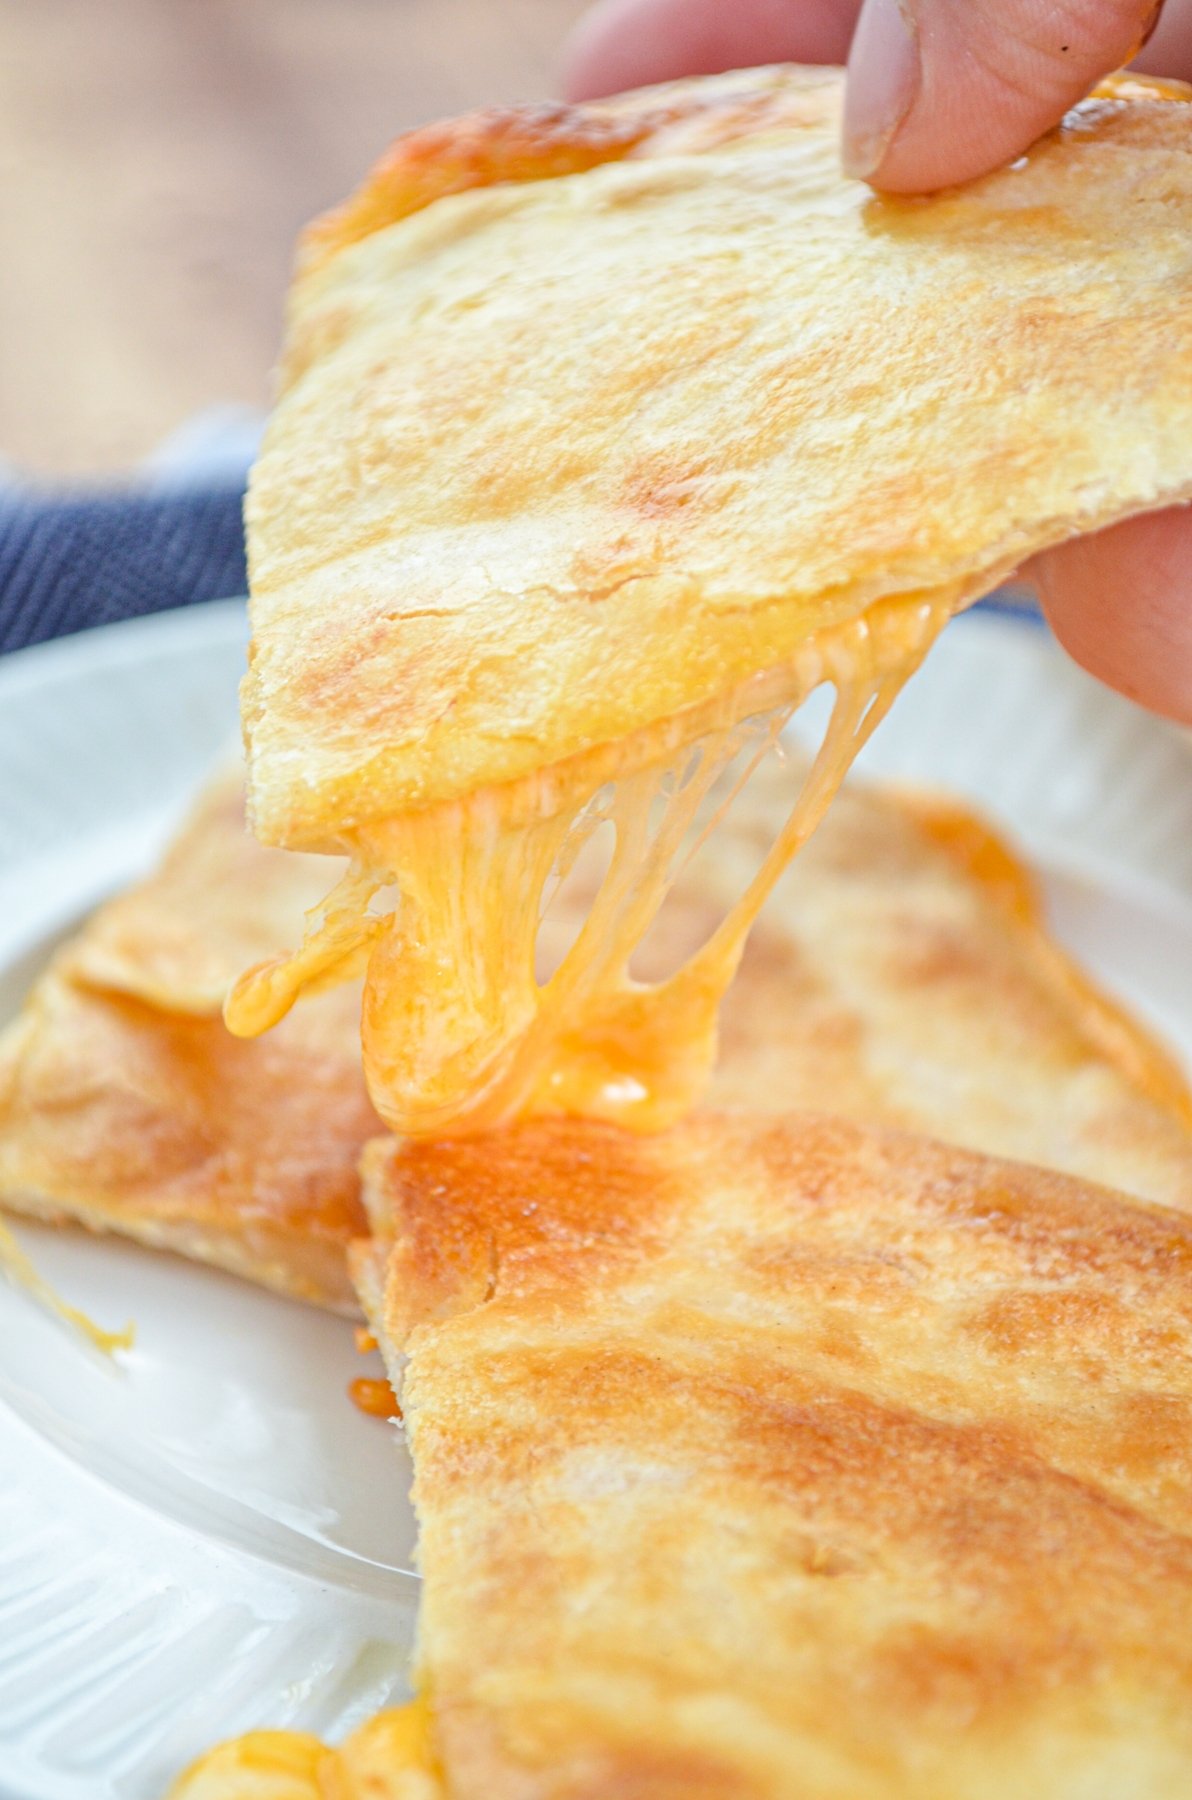 A stack of cheese quesadillas, a triangle being lifted with cheese stretching.